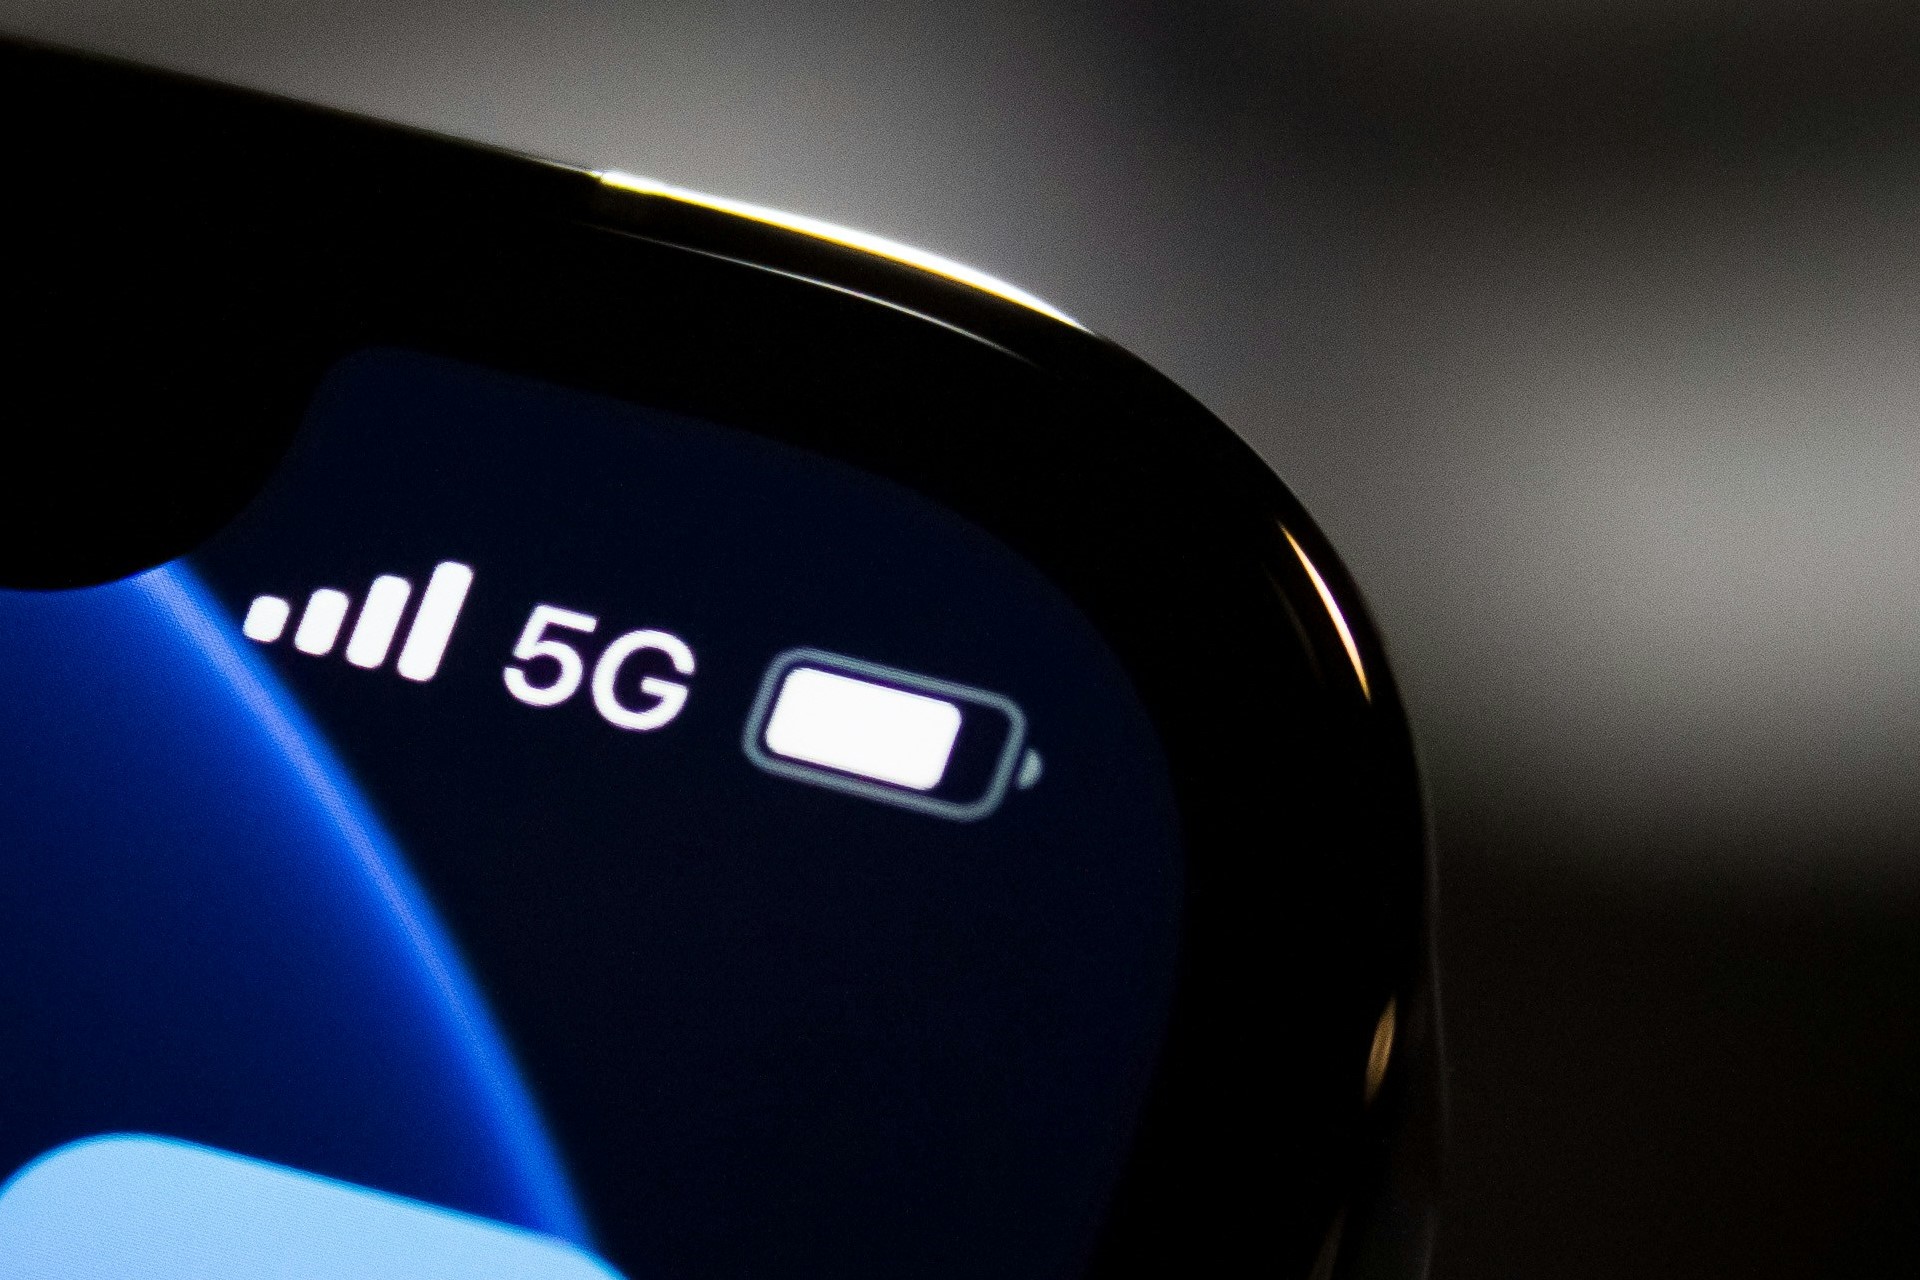 Is 5G Better Than LTE?